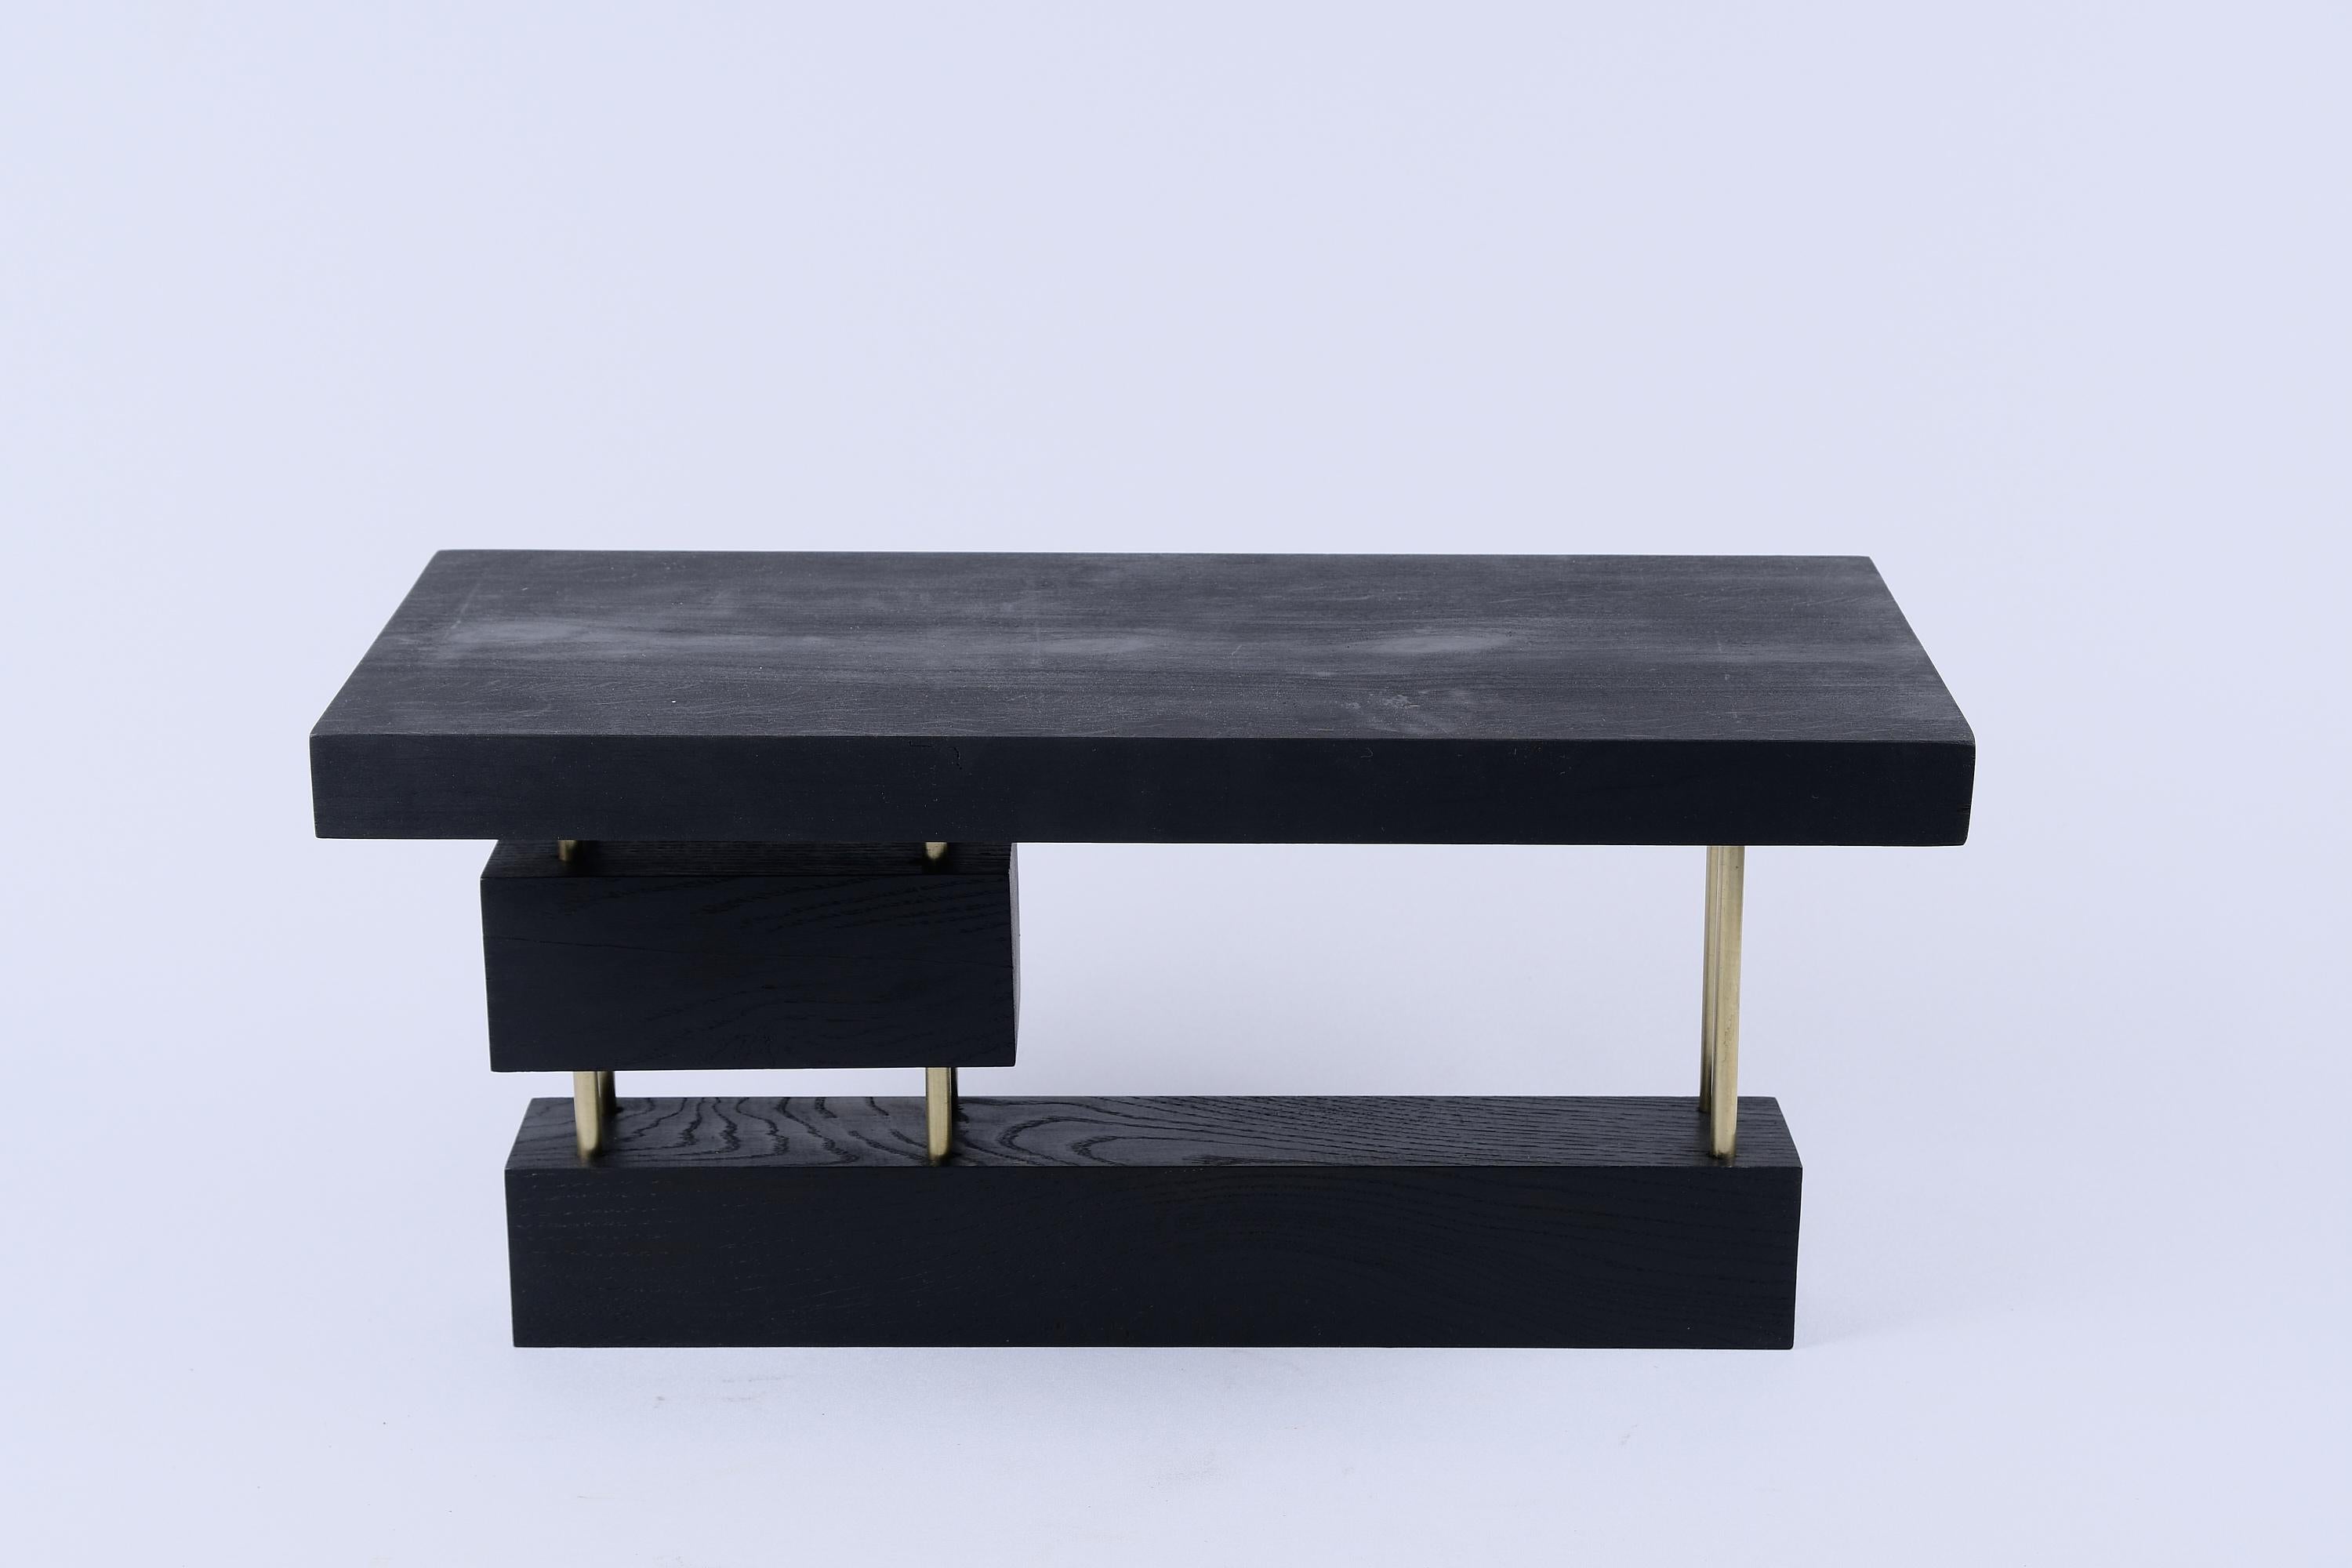 Unique wooden piece usable as a side table or simply as a decorative object. It is build in combination of high quality burnt oak & brass, and protected with the highest quality oils, ensuring durability for generations. Such unique handmade design